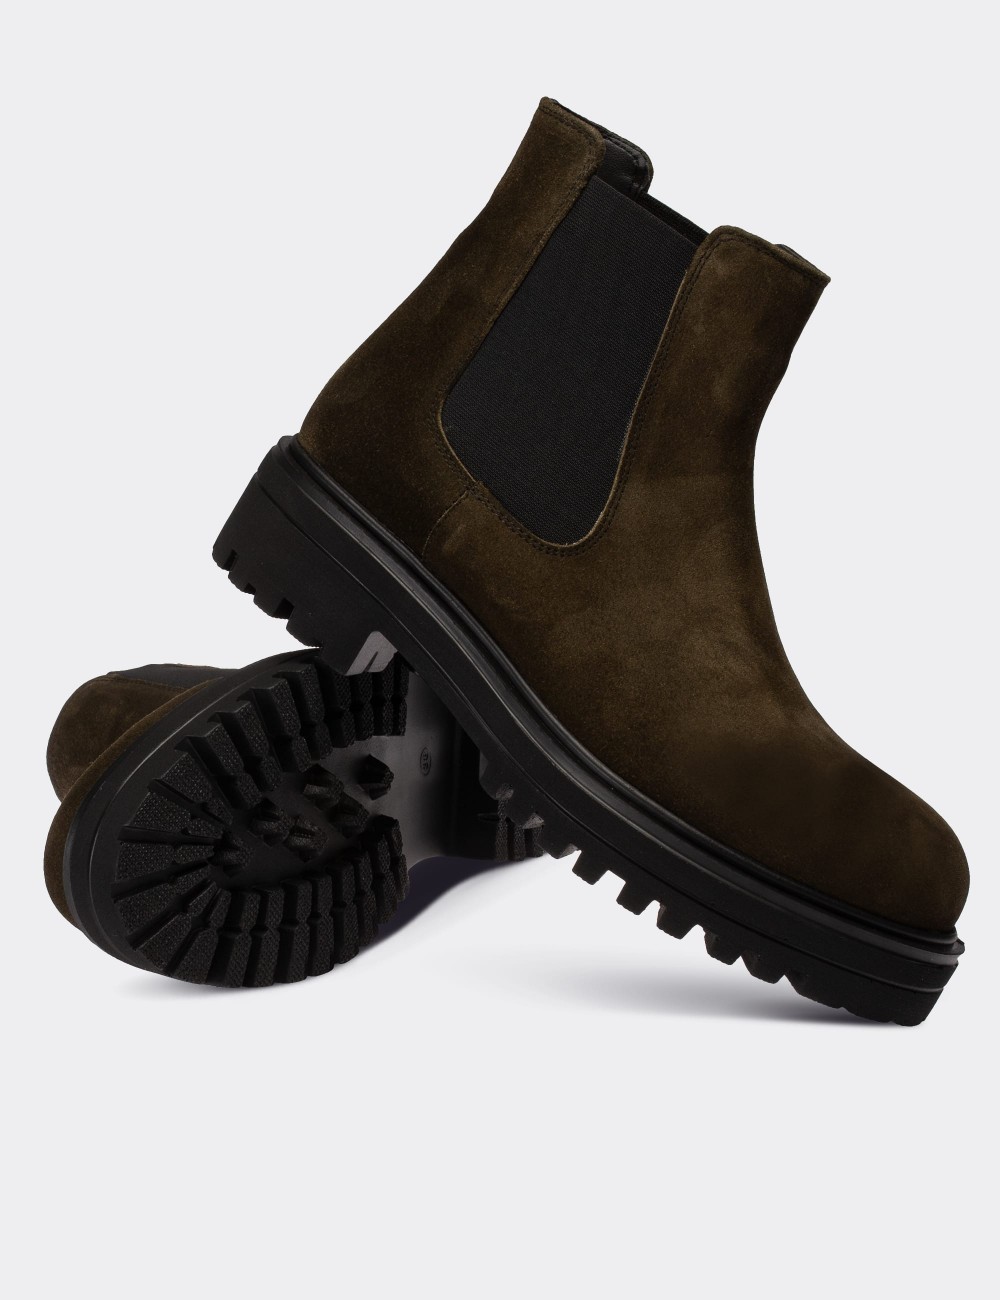 Green Suede Leather Chelsea Boots - 01801ZYSLE01